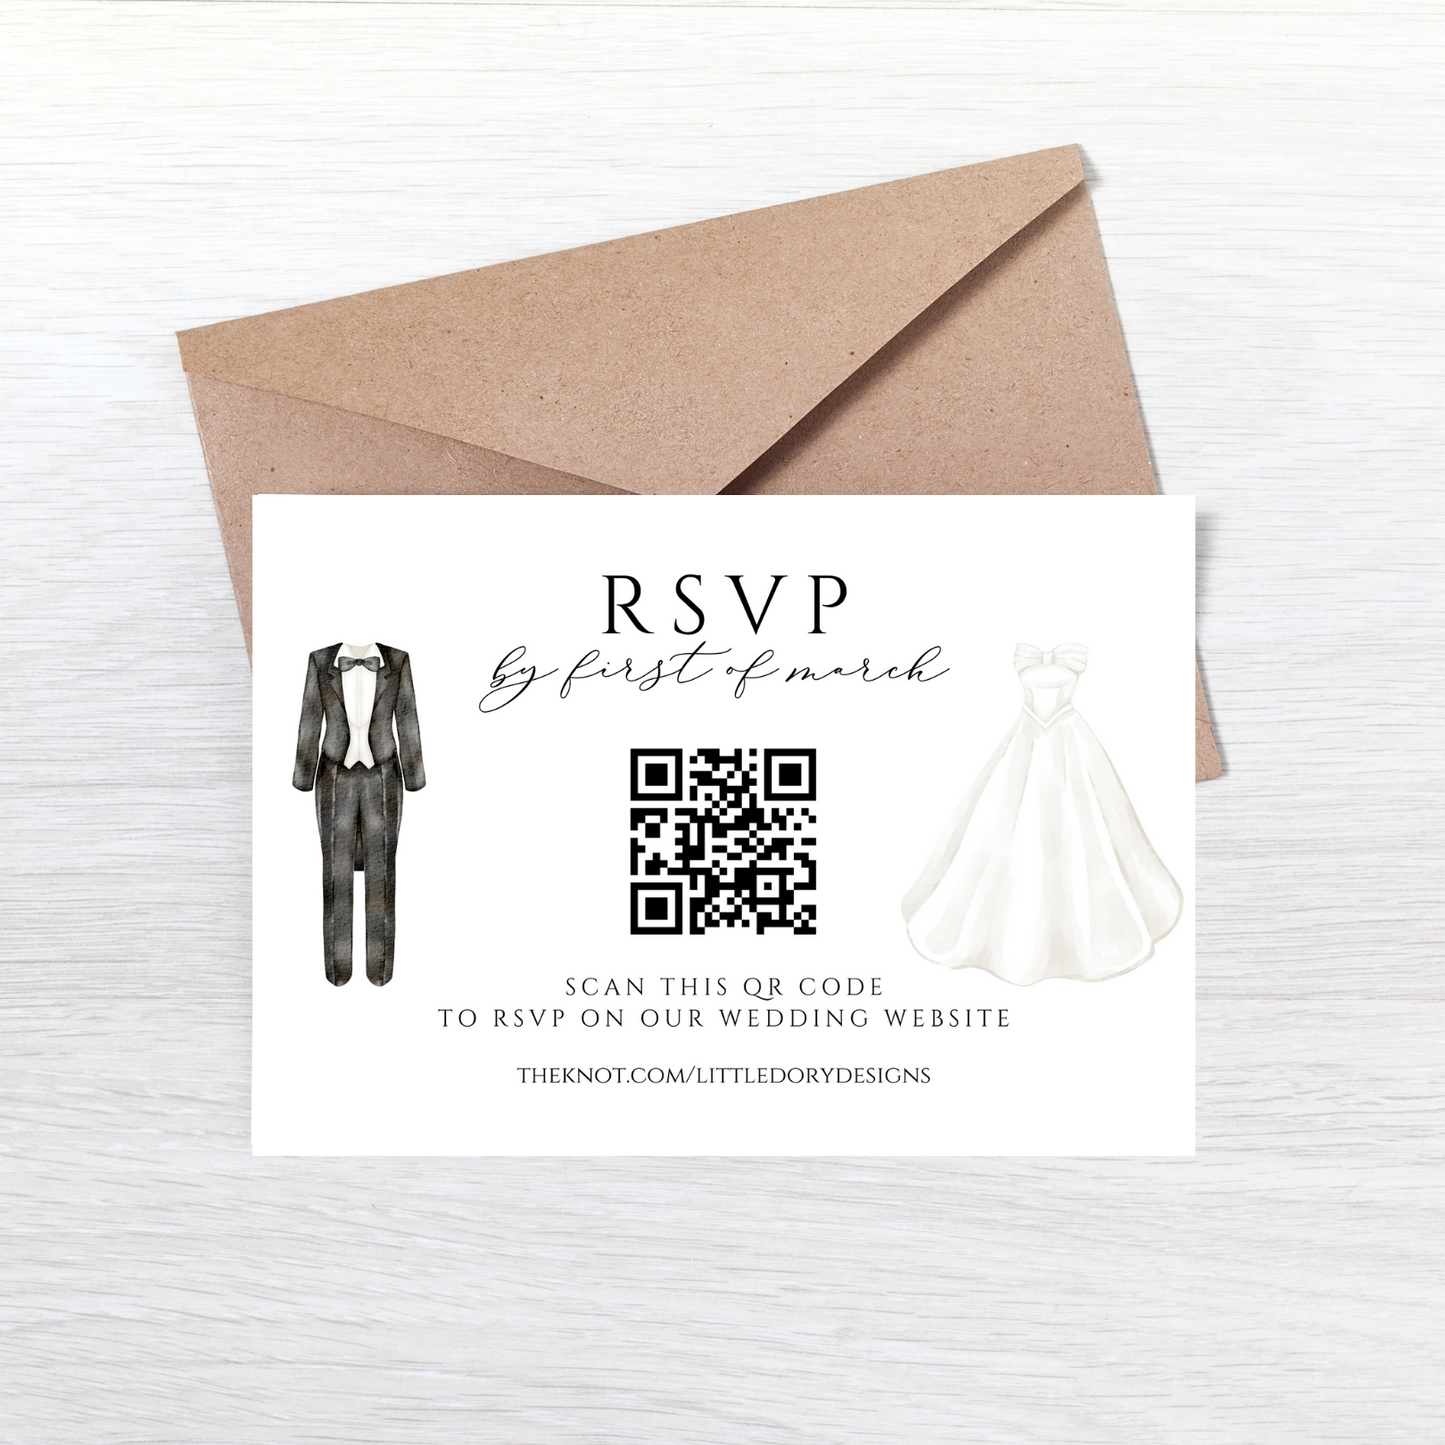 A white card sits on top of a kraft paper envelope against an off-white background. The card features a tuxedo on the left hand side, a wedding dress on the right and a QR code in the middle. Surrounding the QR code are details for guests.